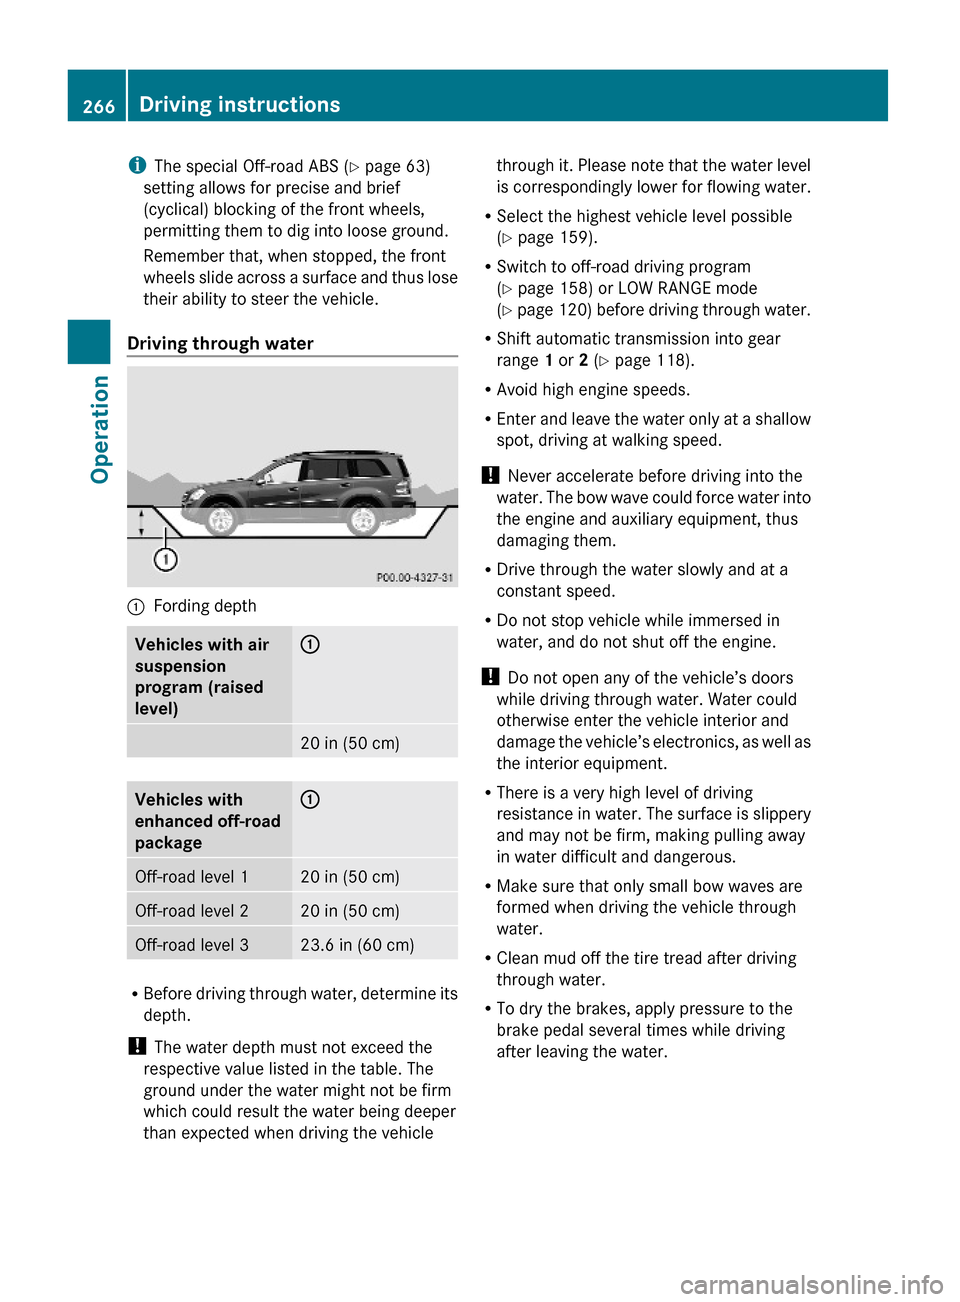 MERCEDES-BENZ GL550 2010 X164 Owners Guide iThe special Off-road ABS (Y page 63)
setting allows for precise and brief
(cyclical) blocking of the front wheels,
permitting them to dig into loose ground.
Remember that, when stopped, the front
whe